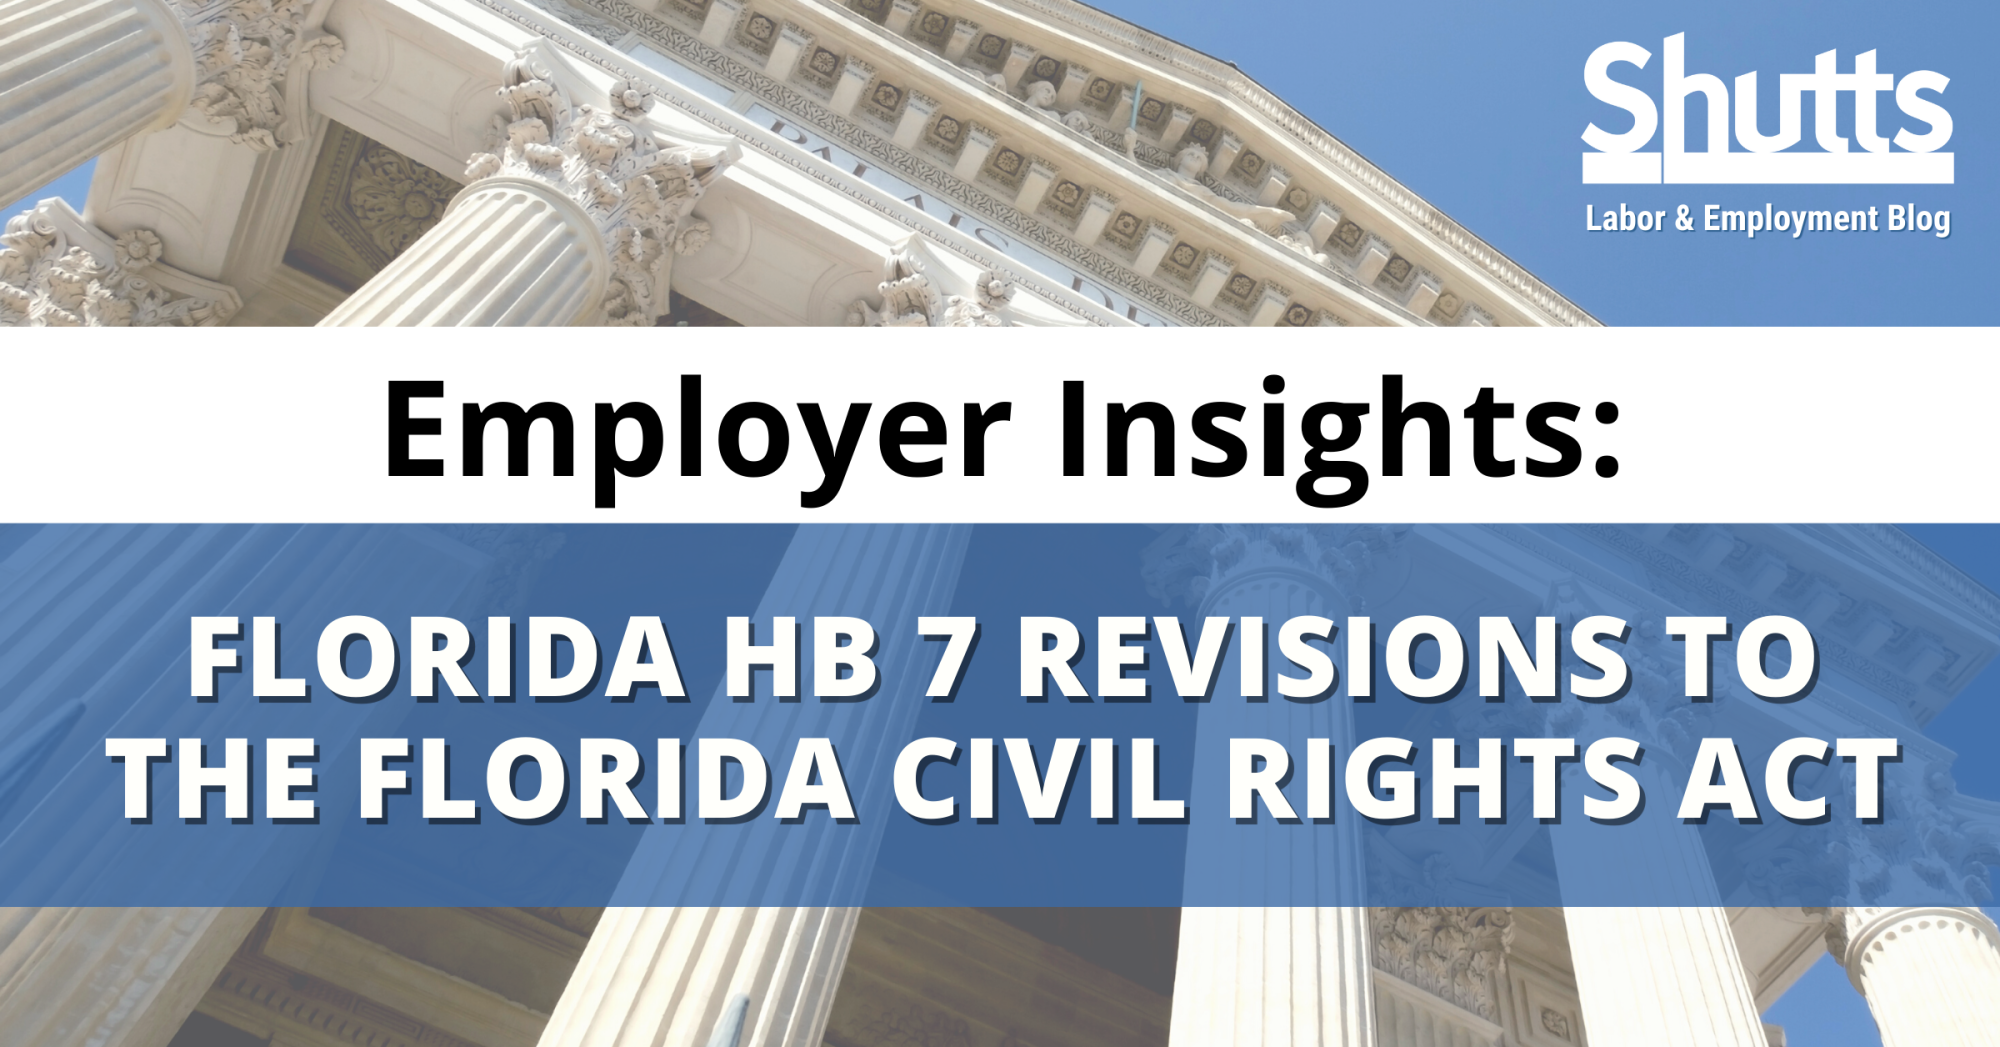 Employer Insights: Florida HB 7 Revisions to the Florida Civil Rights Act